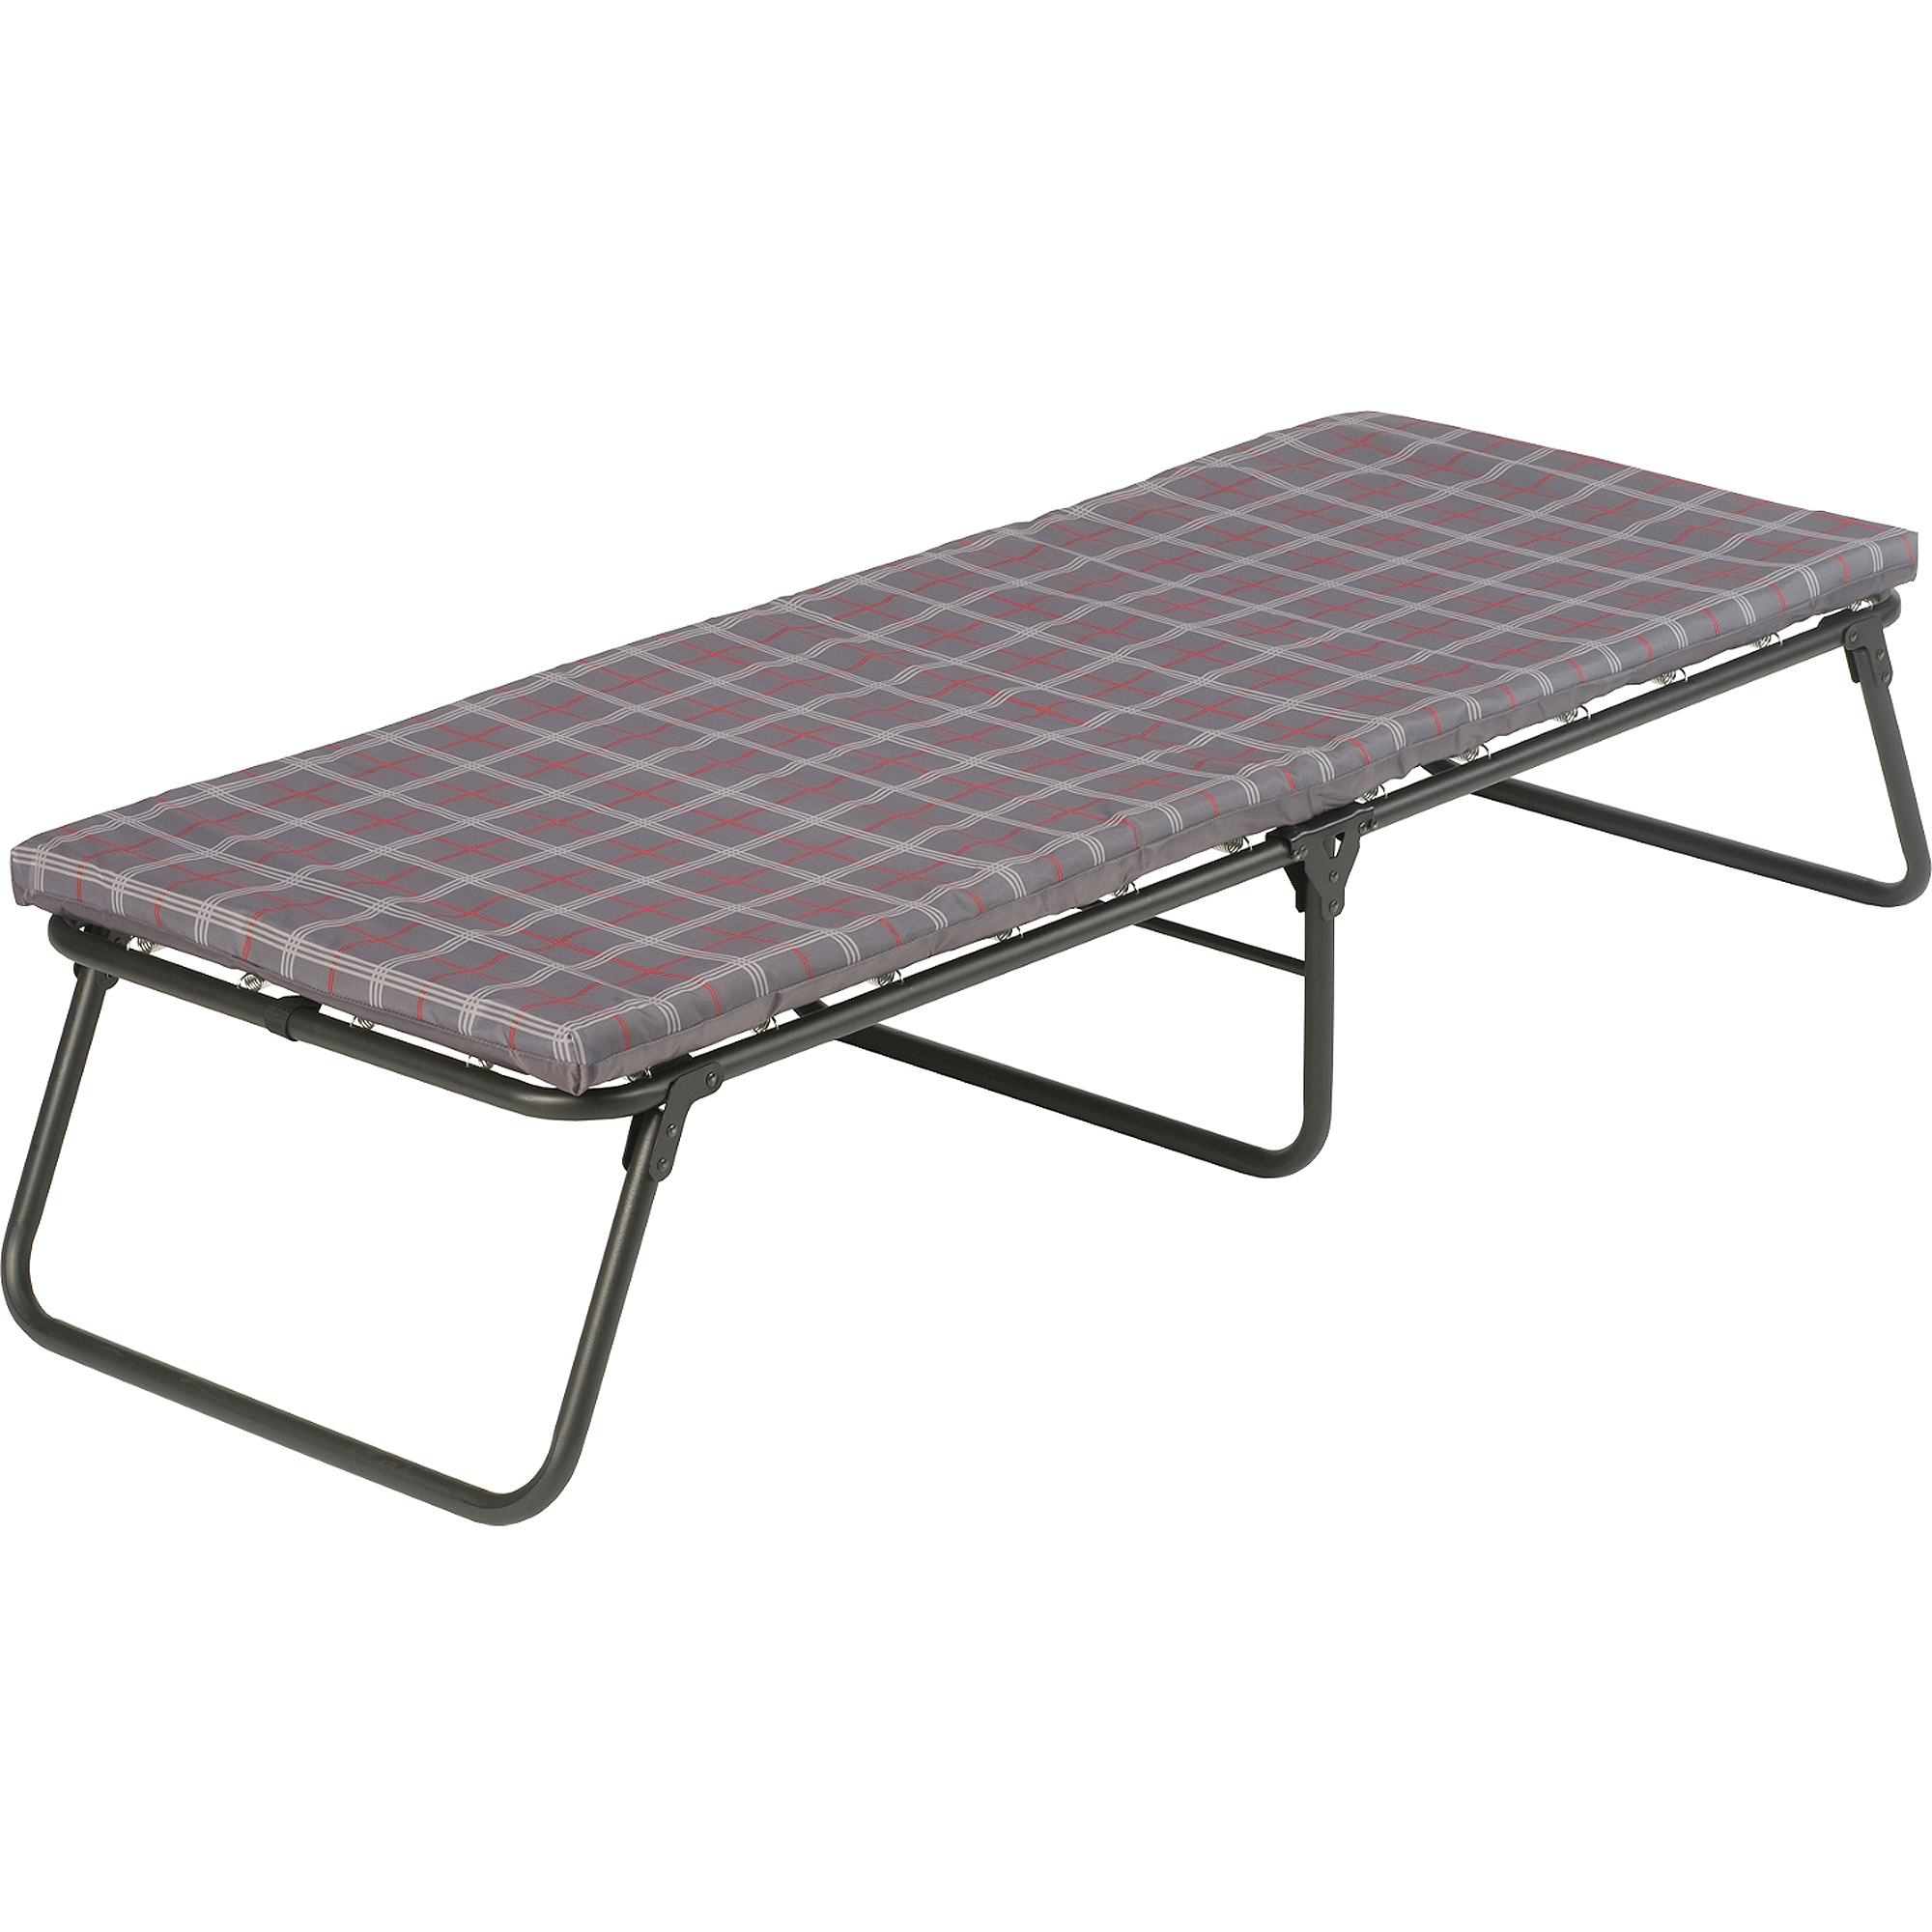 Coleman® Comfortsmart™ Folding Padded Cot, 69 x 25 x 15 in - image 1 of 5